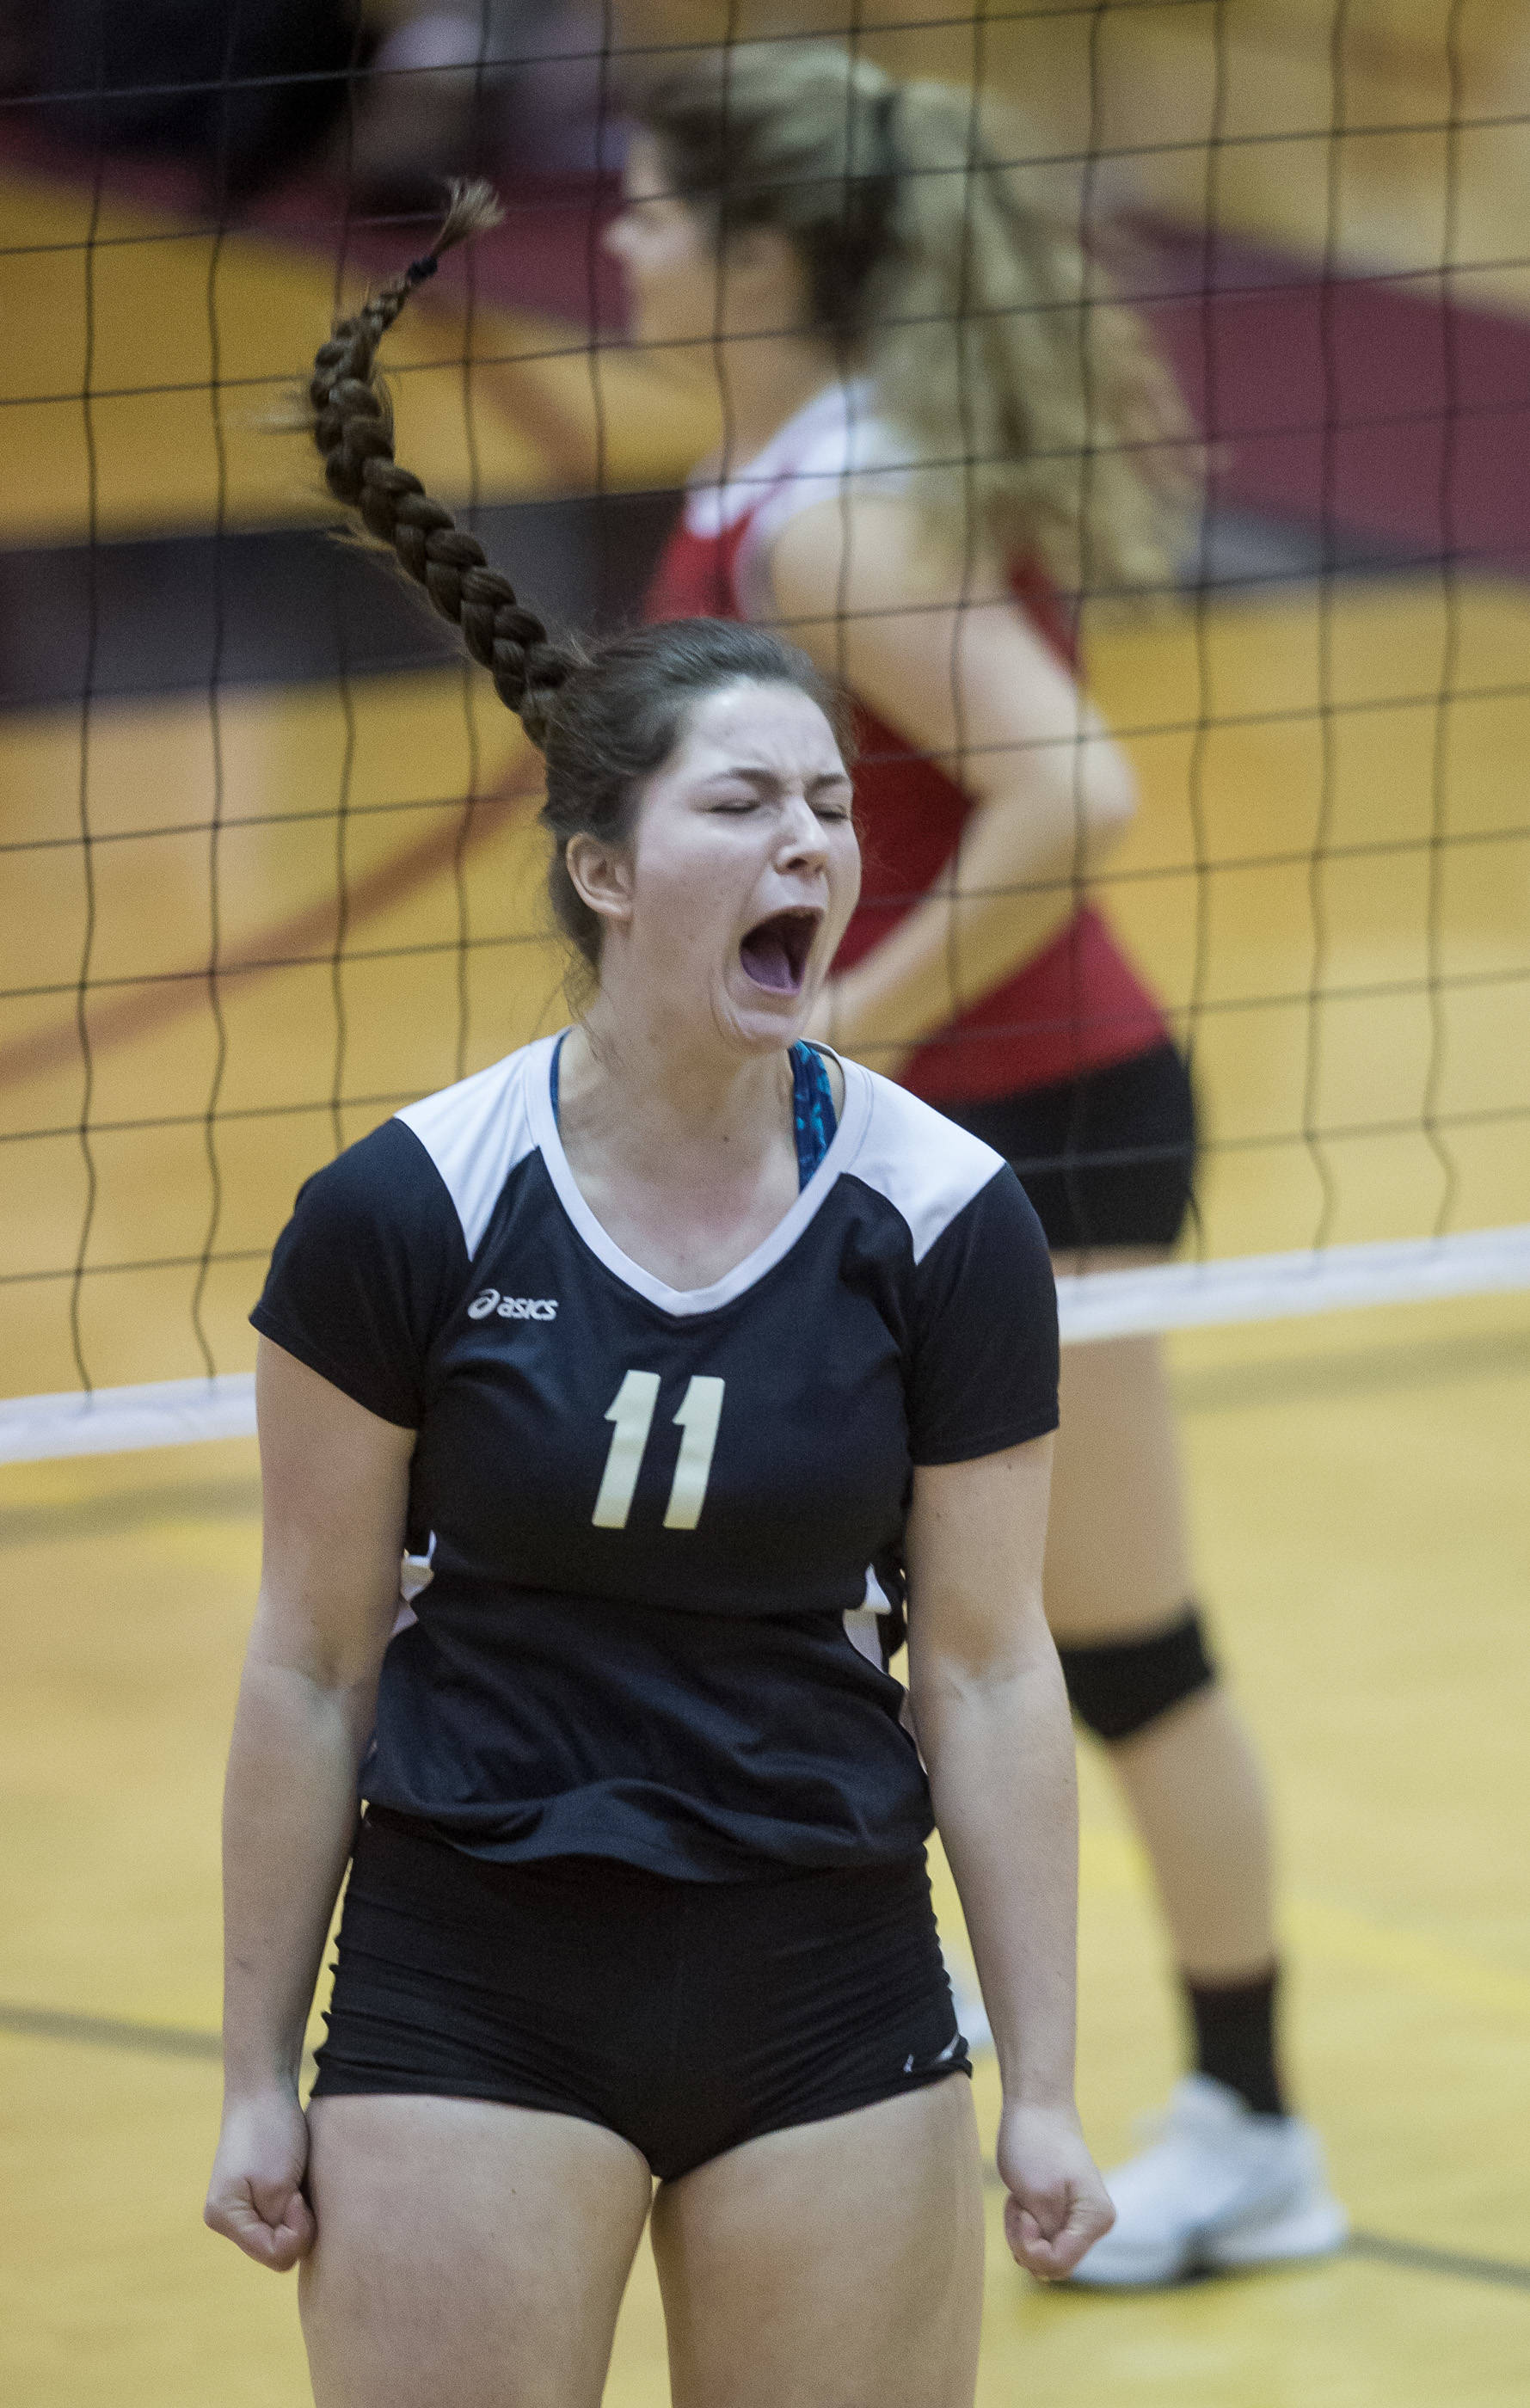 Petersburg’s Eliza Larson celebrates a point against Juneau-Douglas at the Juneau Invitational Volleyball Extravaganza at JDHS on Friday, Oct. 13, 2017.